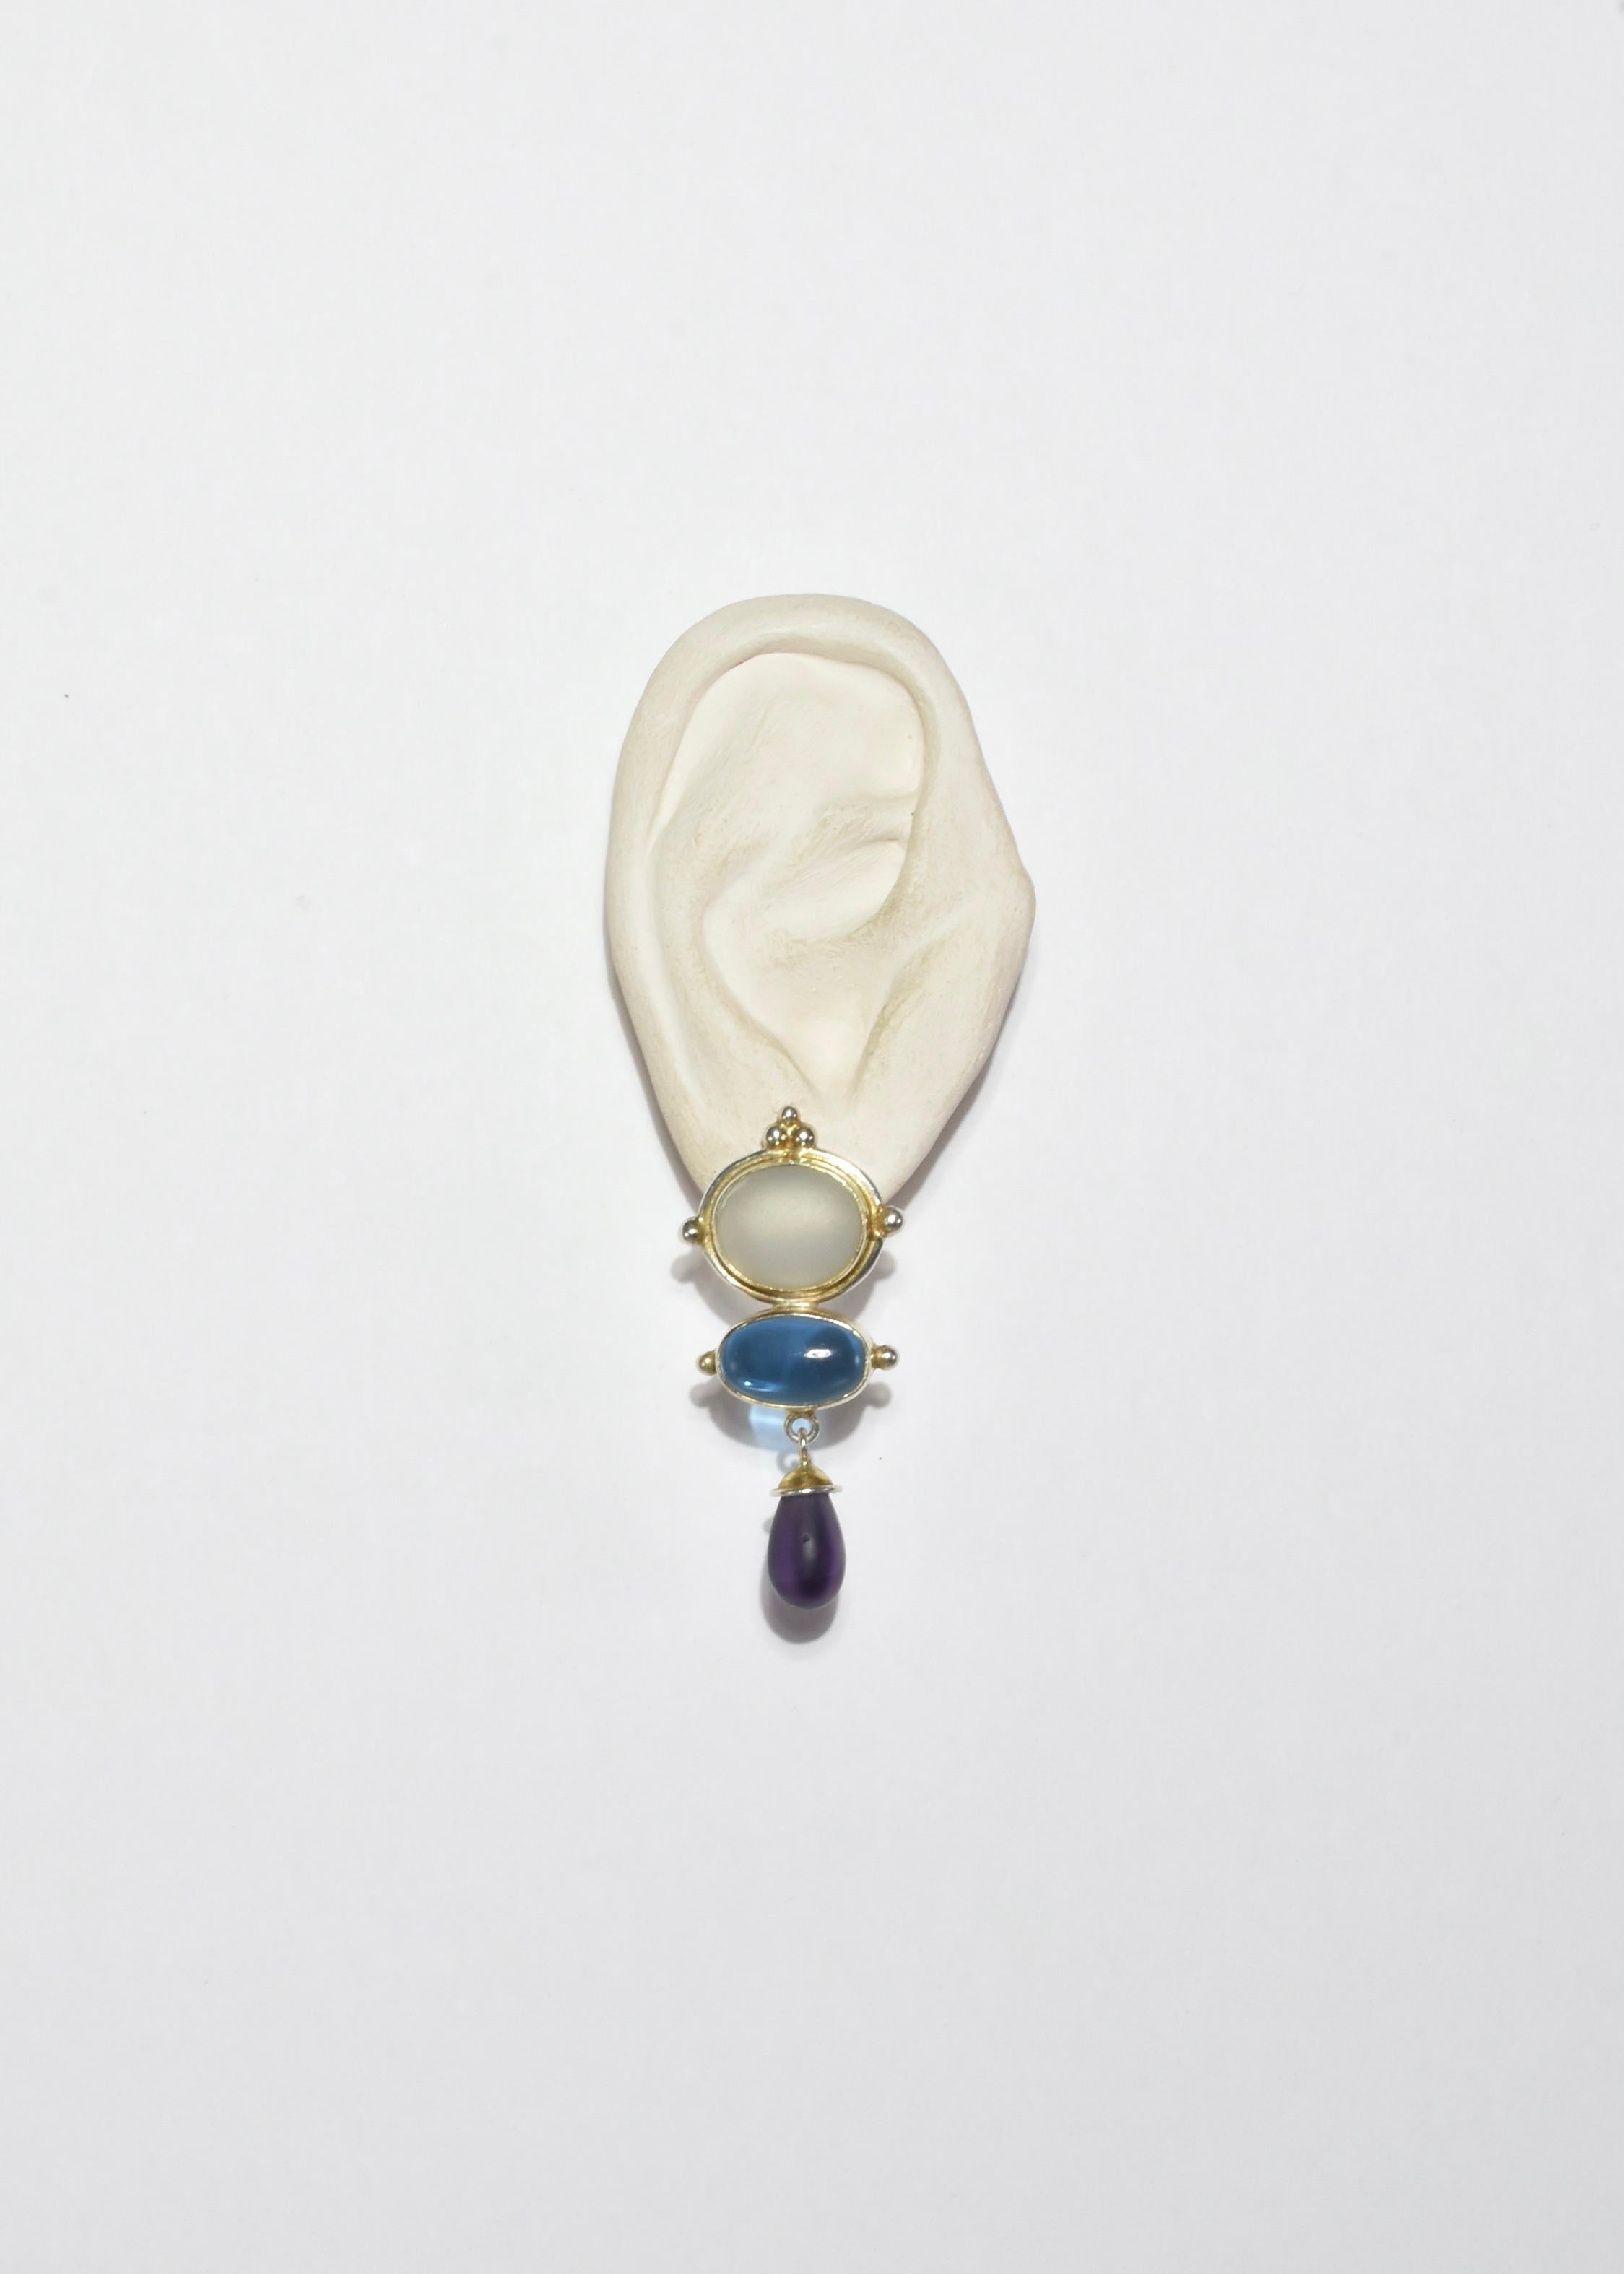 Stunning vintage vermeil earrings with blue, purple, and white glass detail, pierced. Stamped 925.

Material: Gold vermeil, glass.